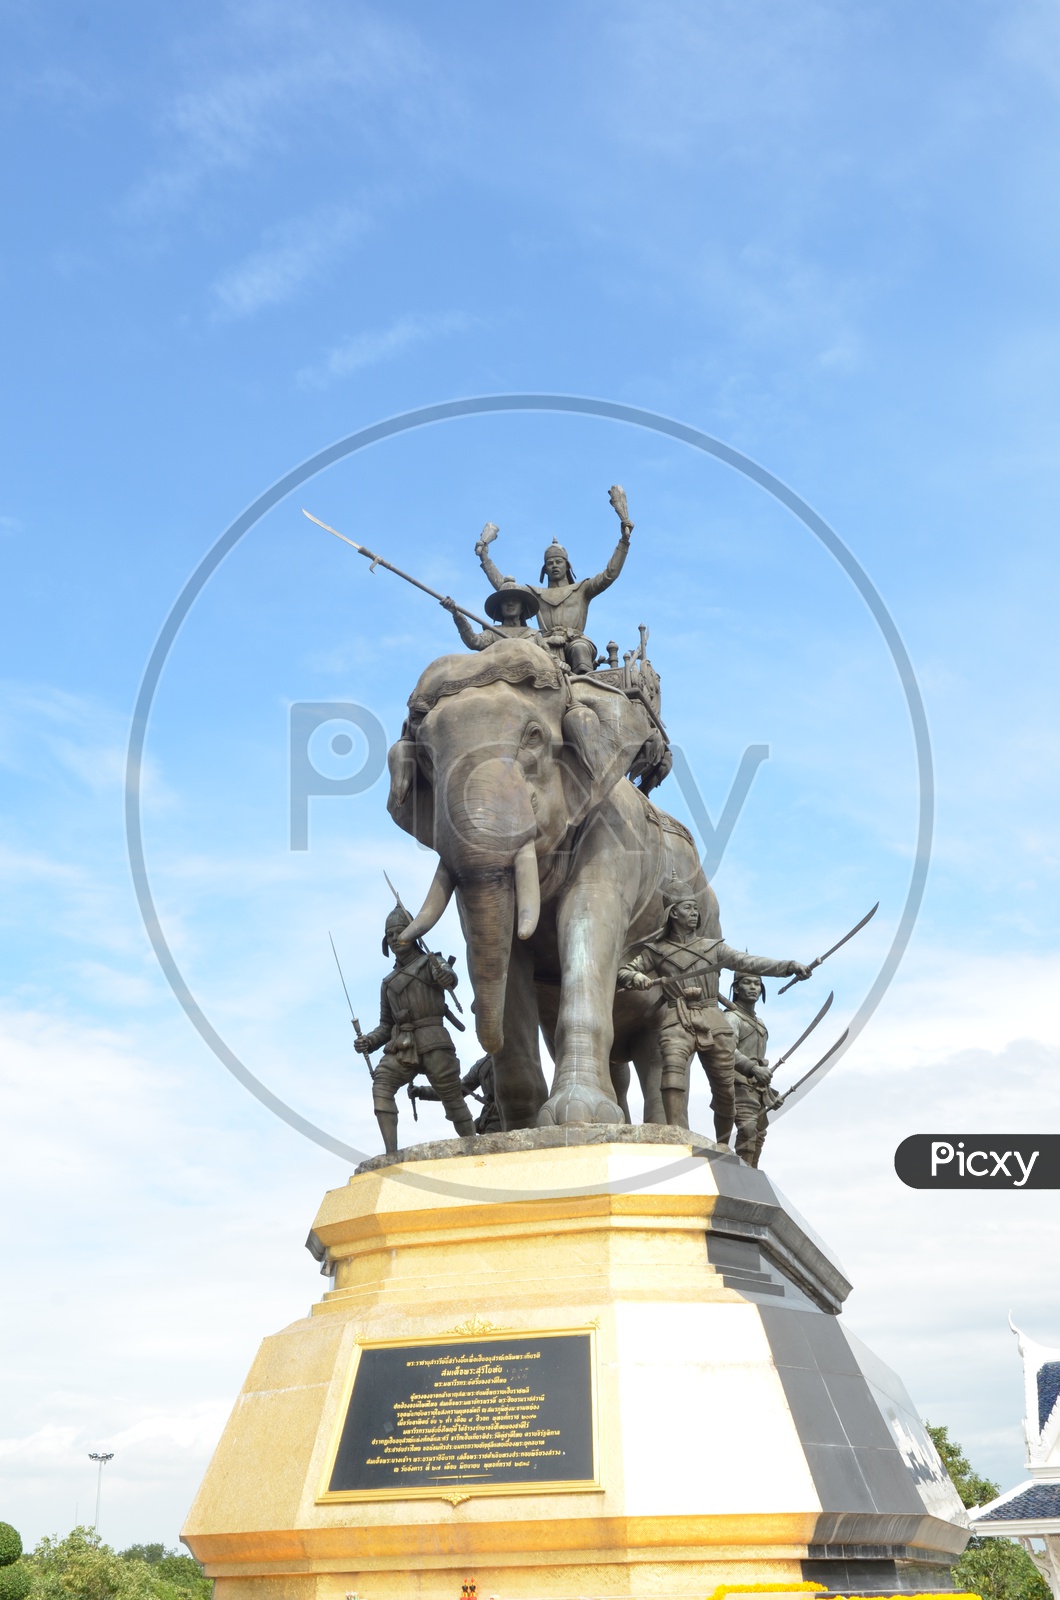 The elephant statue in the blue sky,Monument of King Naresuan at Suphanburi province in Thailand